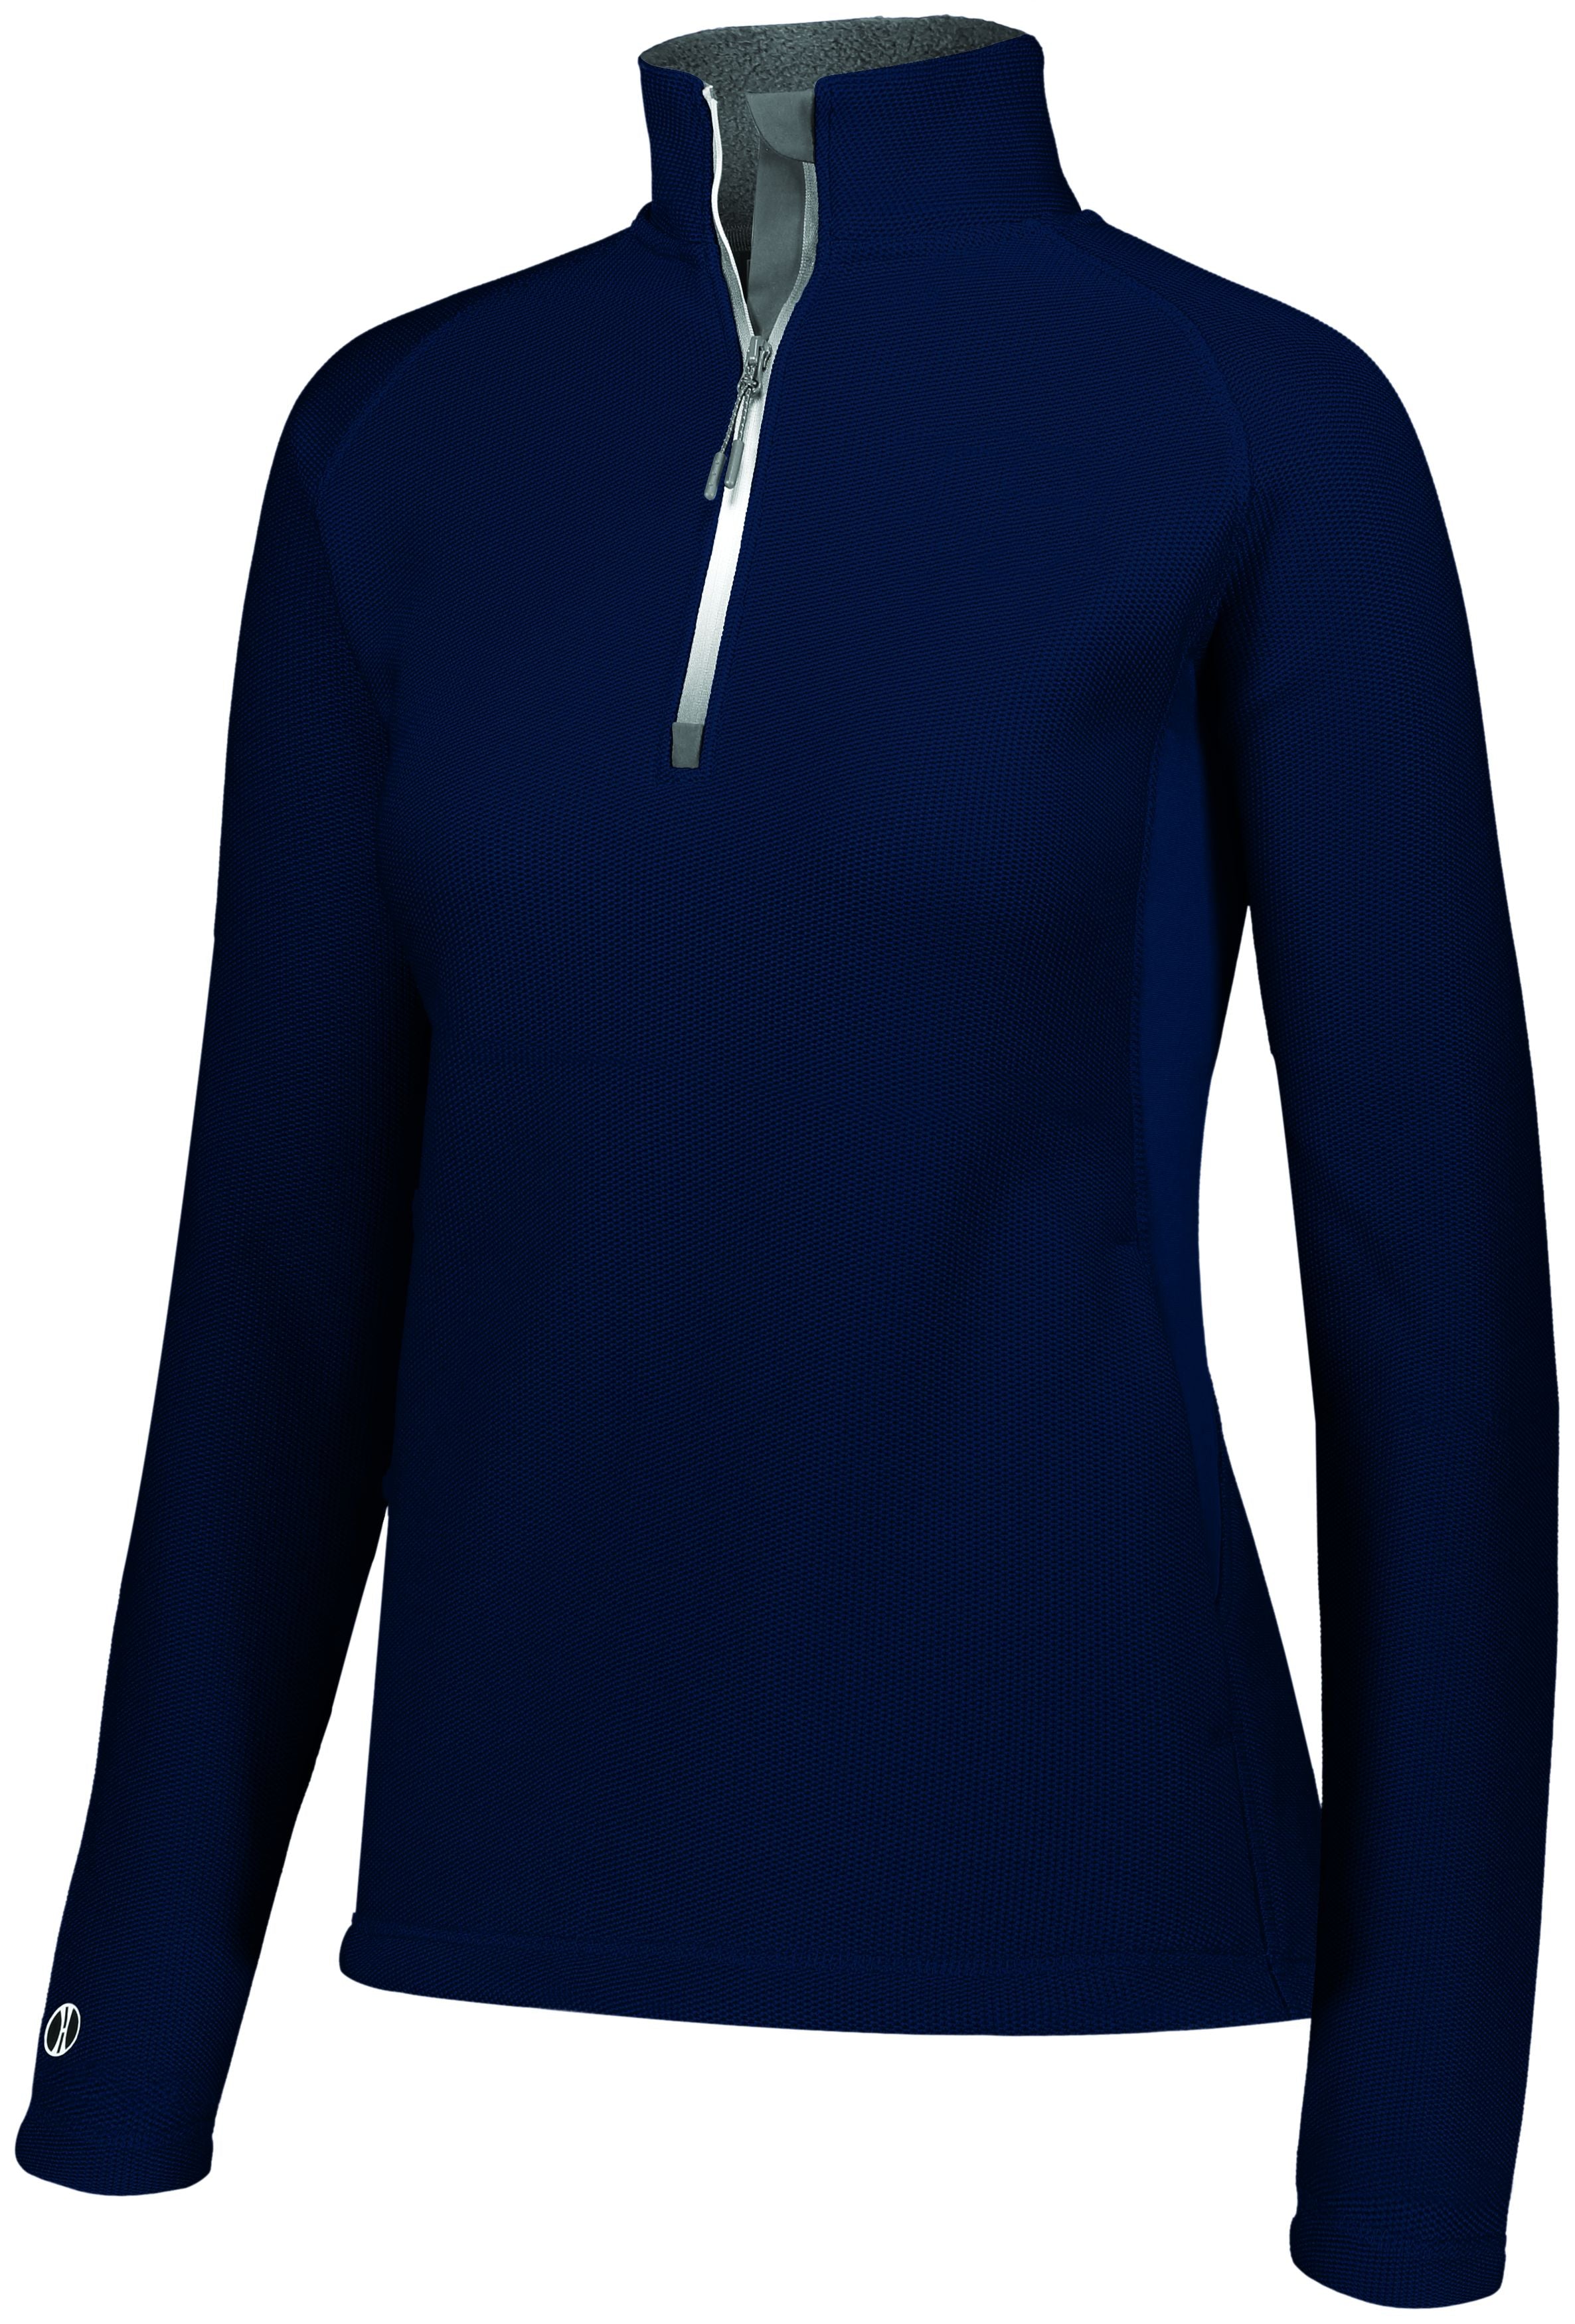 Holloway Ladies Invert 1/2 Zip Pullover in Navy  -Part of the Ladies, Ladies-Pullover, Holloway, Outerwear, Invert-Collection product lines at KanaleyCreations.com